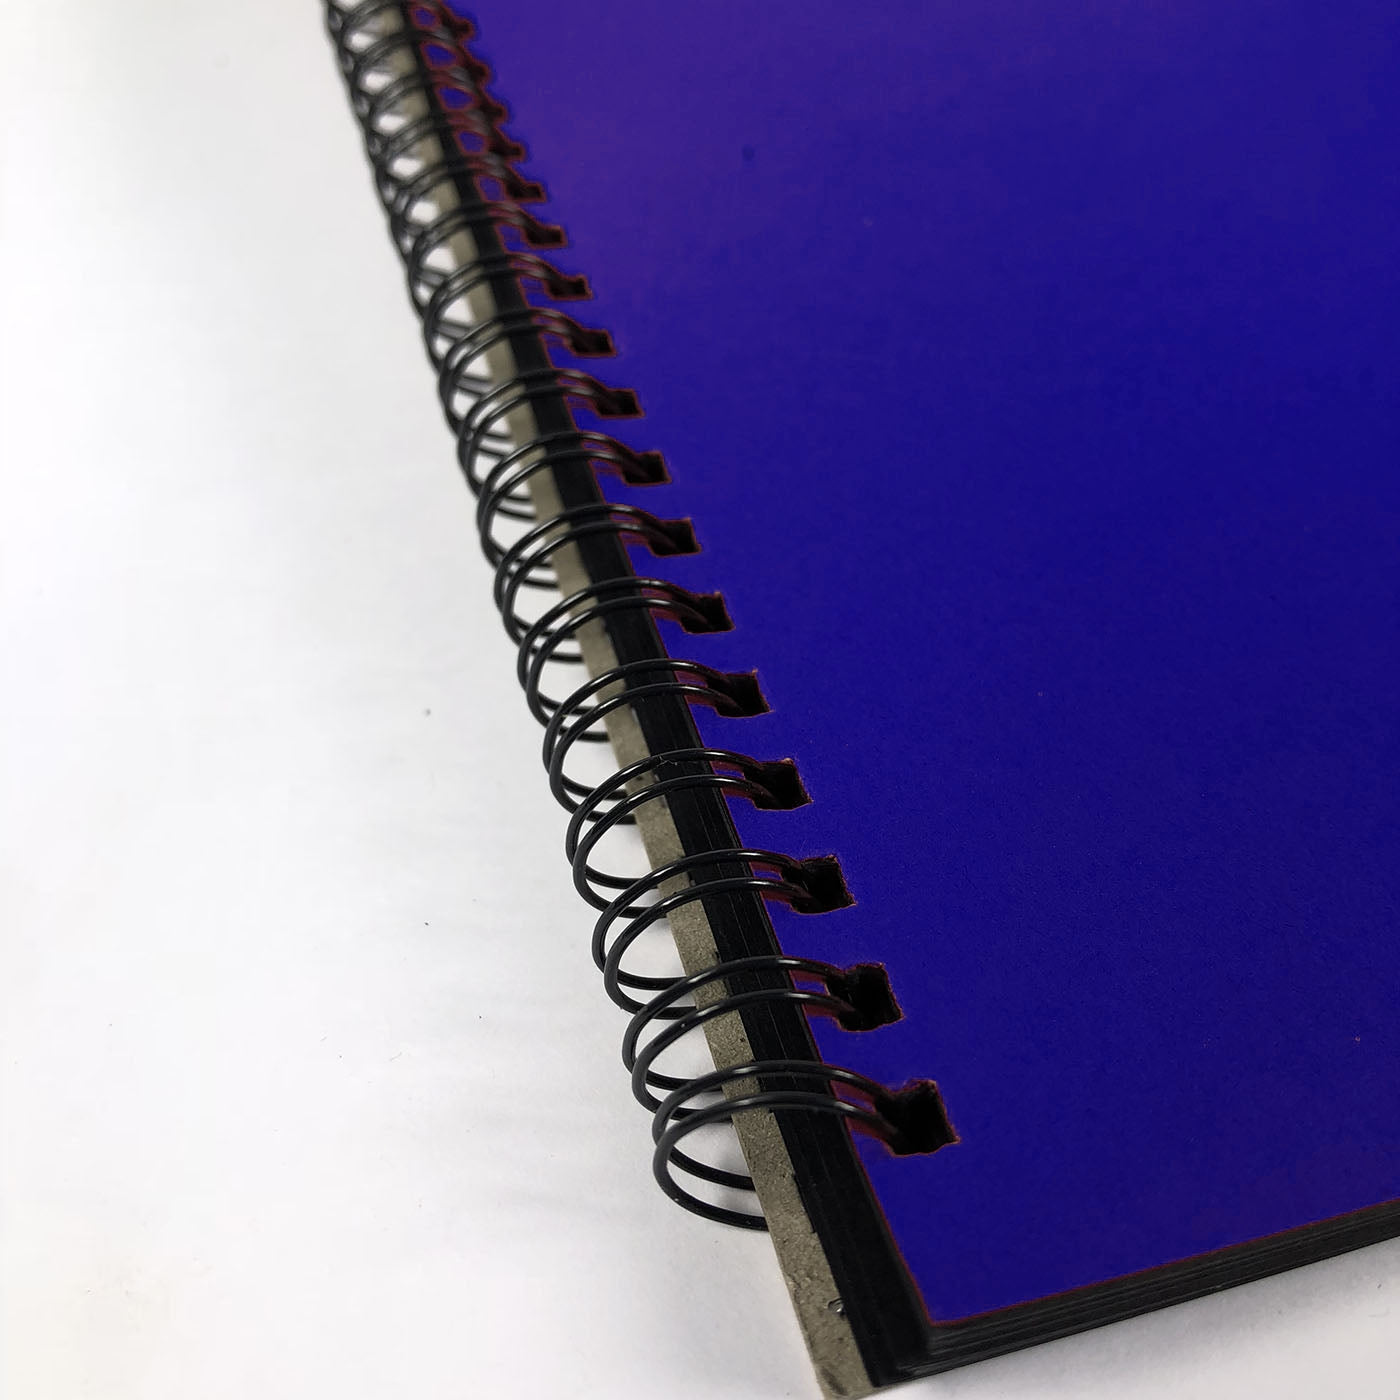 Oversize A4 Hardback Project Book Blue Cover Black Pages